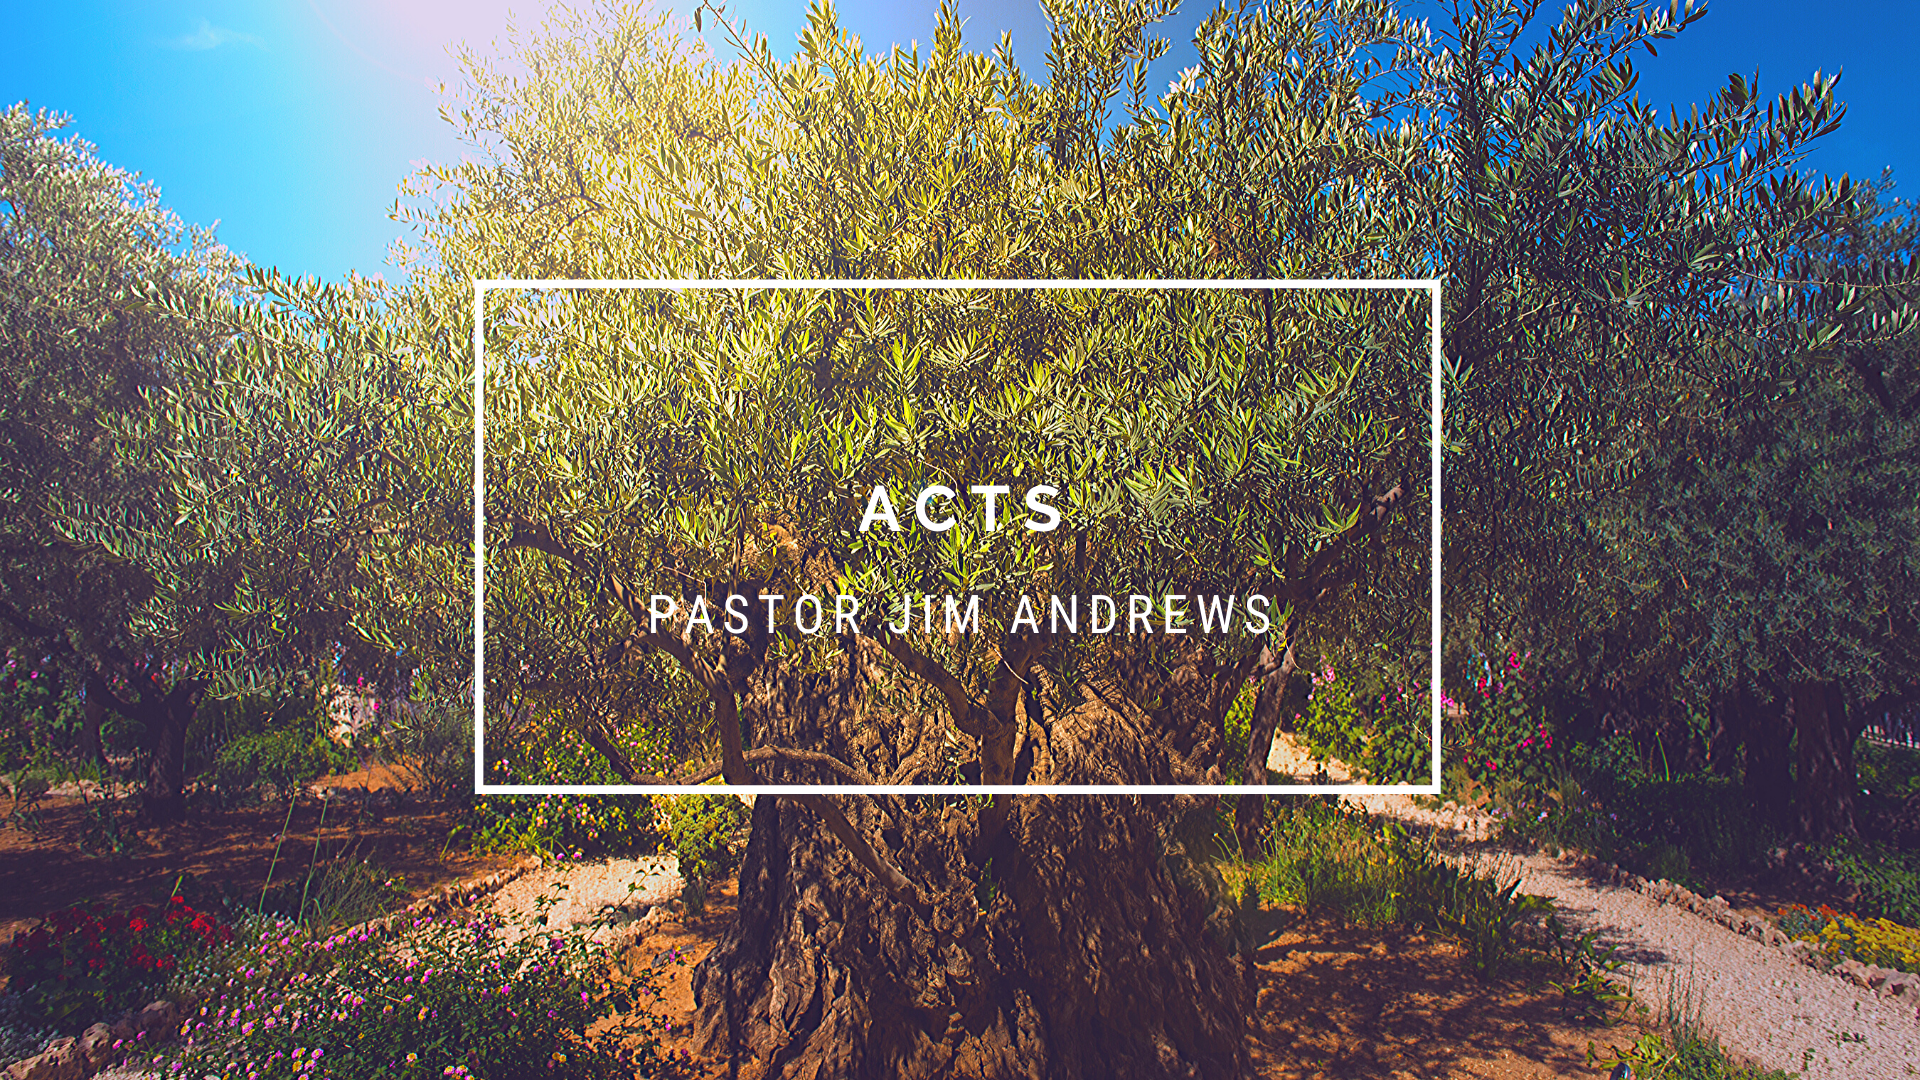 Acts 15:1-5, Part 2